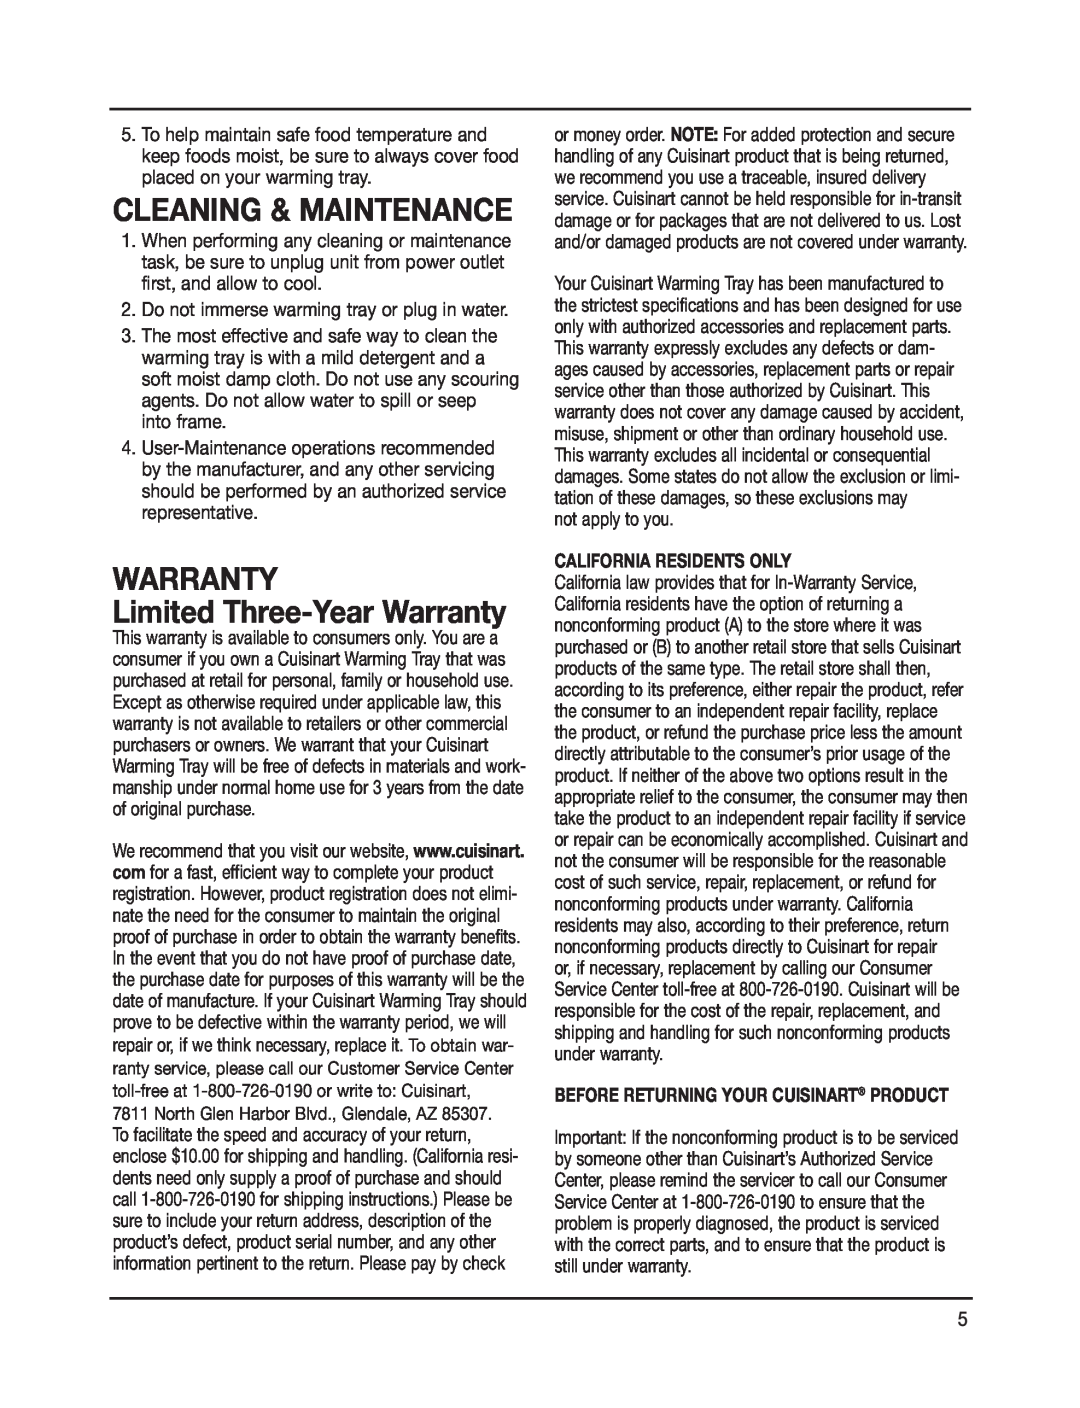 Cuisinart CWT-240 manual Cleaning & Maintenance, Limited Three-Year Warranty, California Residents Only 